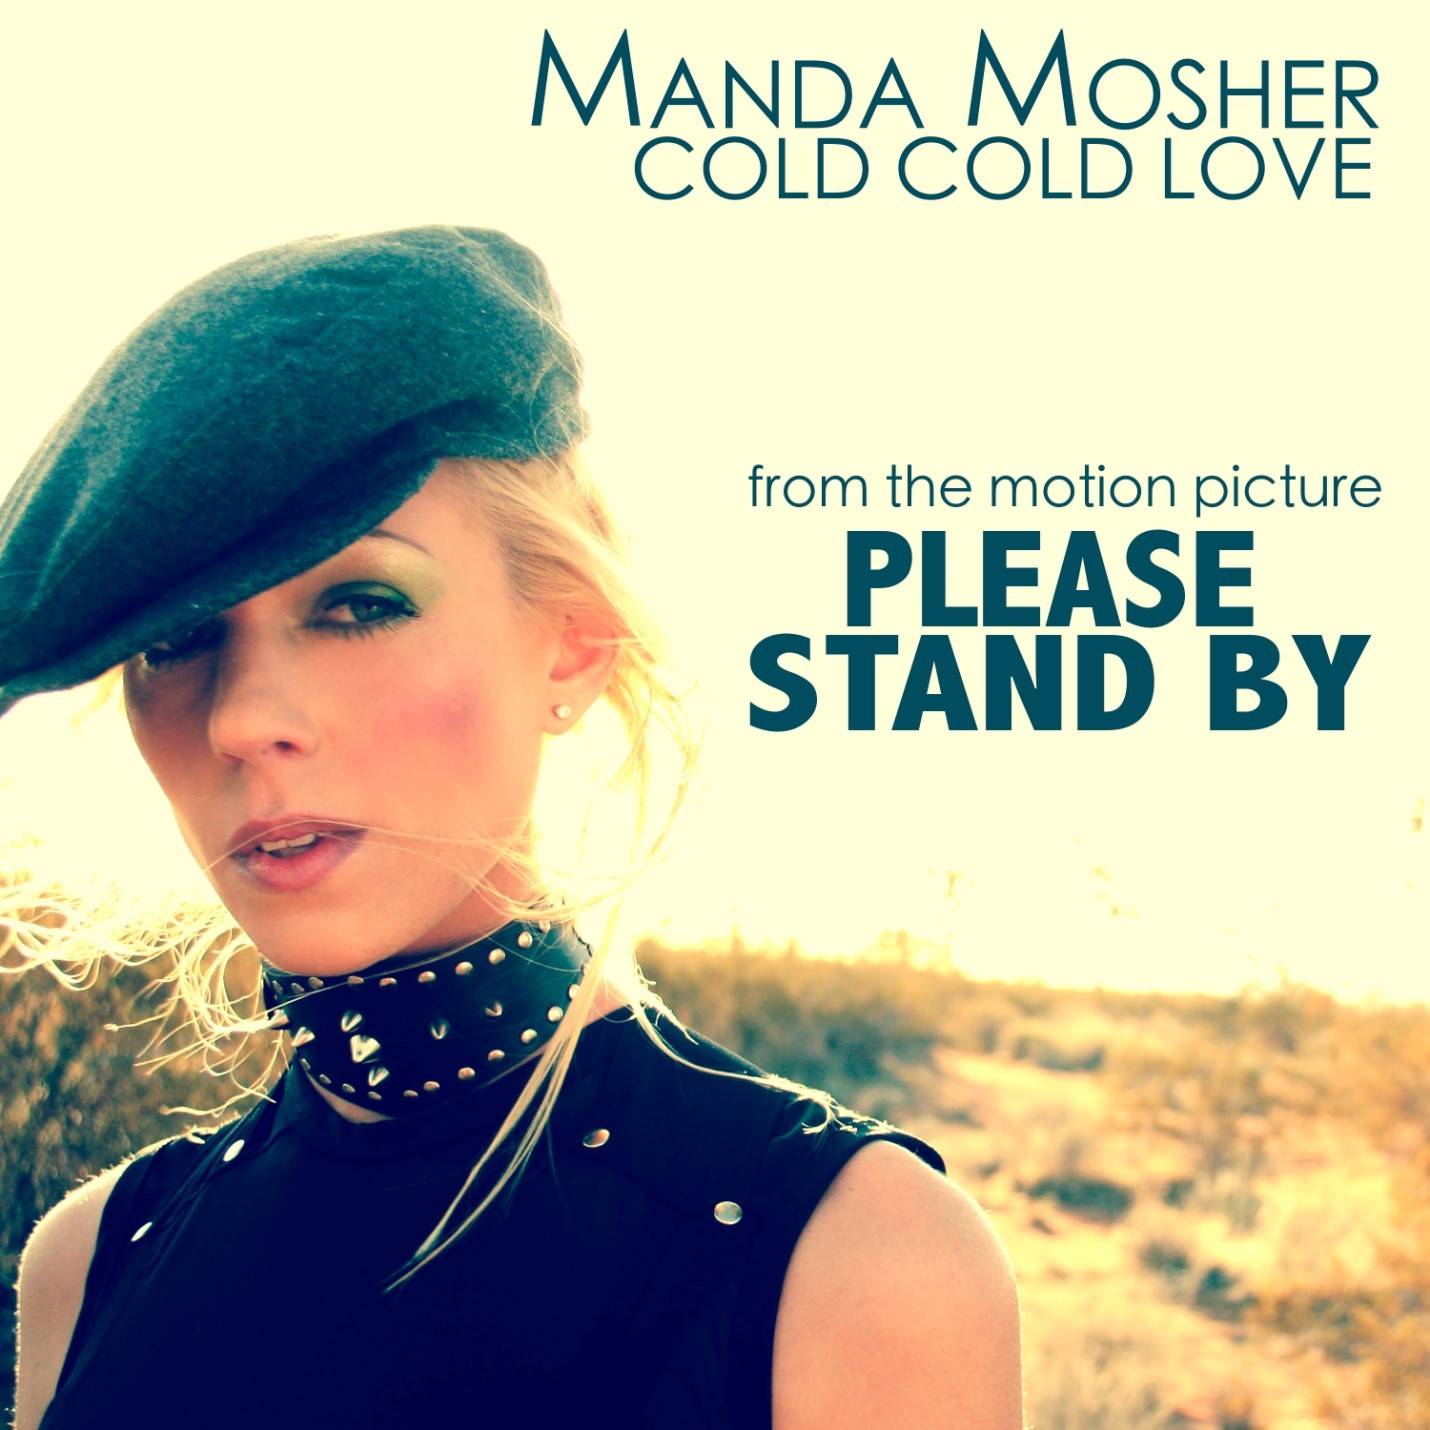 Manda Mosher's "Cold Cold Love" from Motion Picture "Please Stand By" with Dakota Fanning